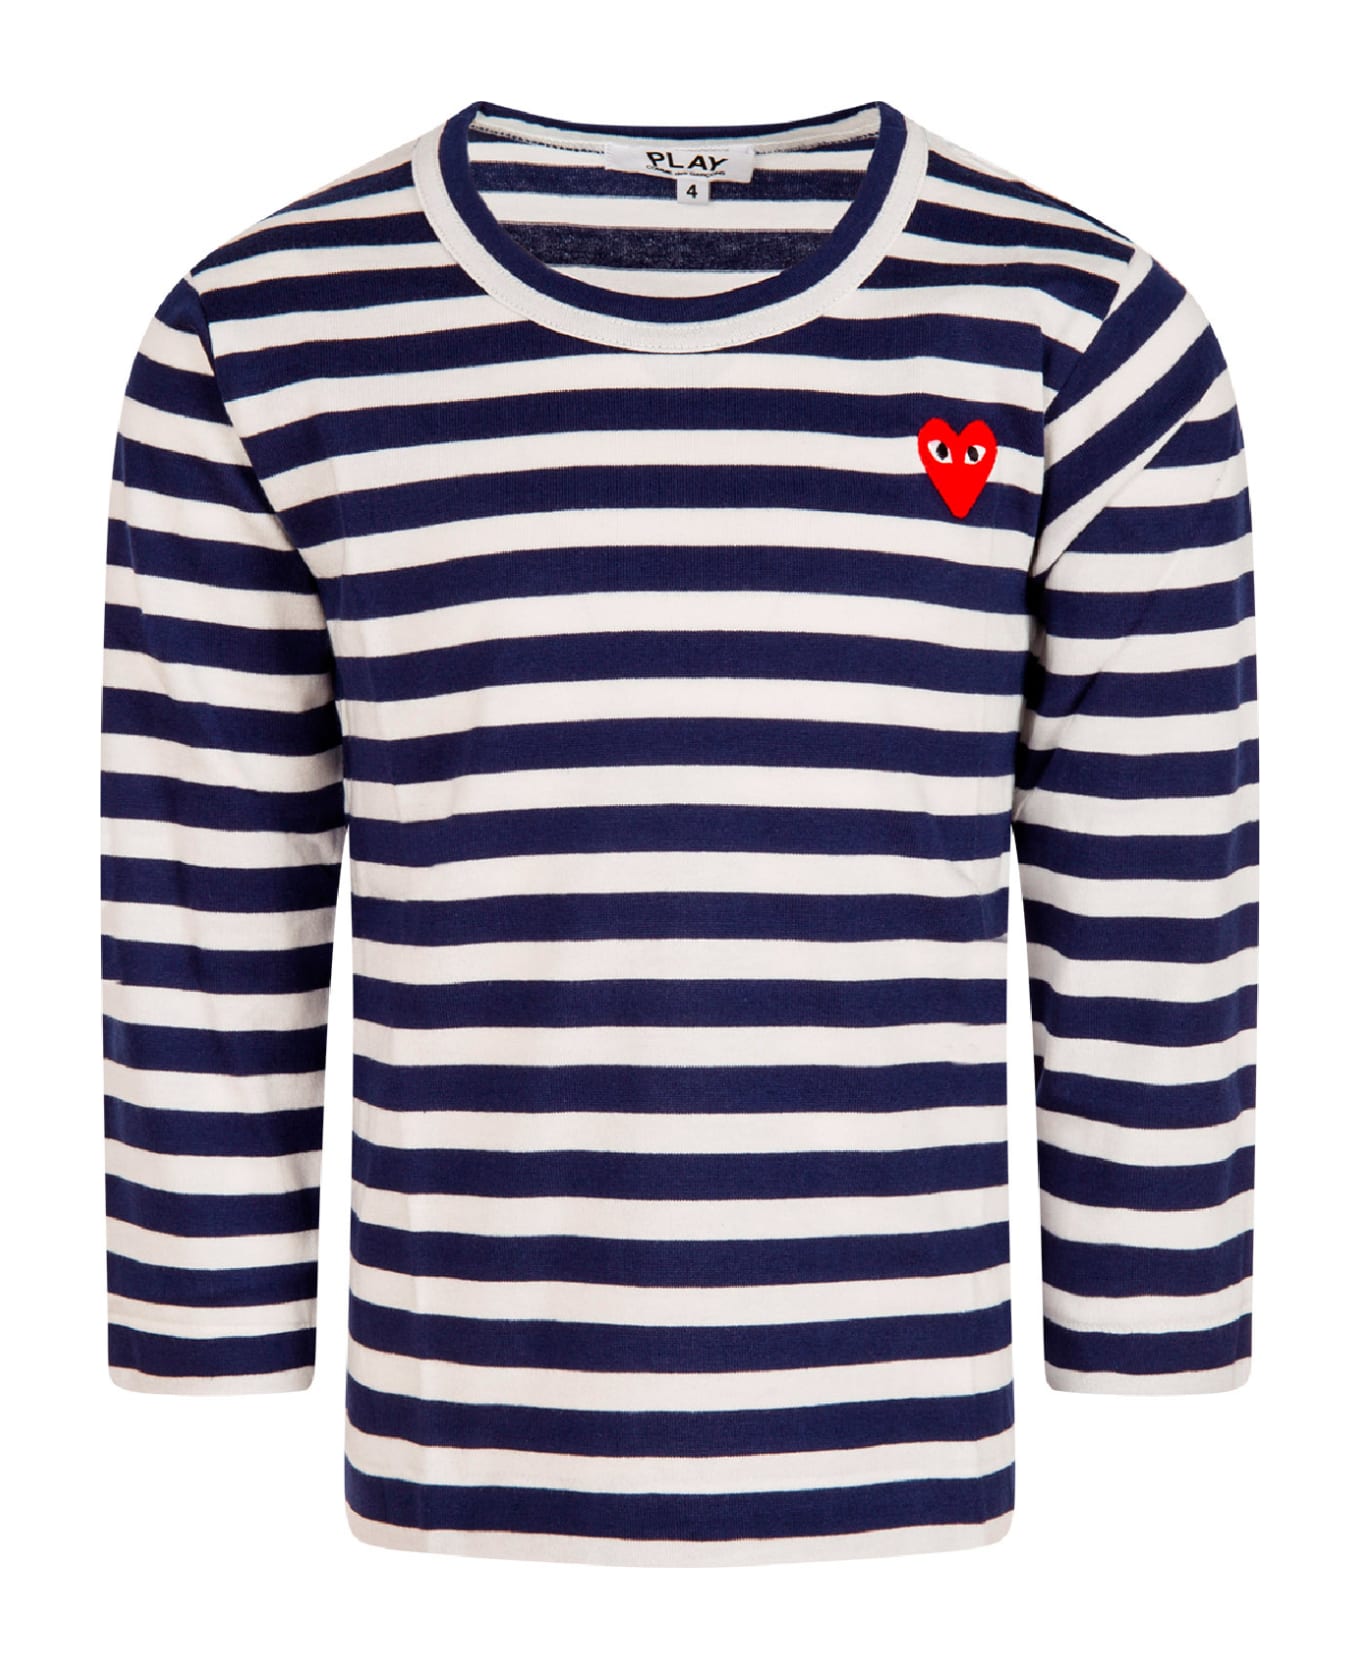 Comme des Garçons Play White And Blue Striped T-shirt With Heart For Kids - Blue